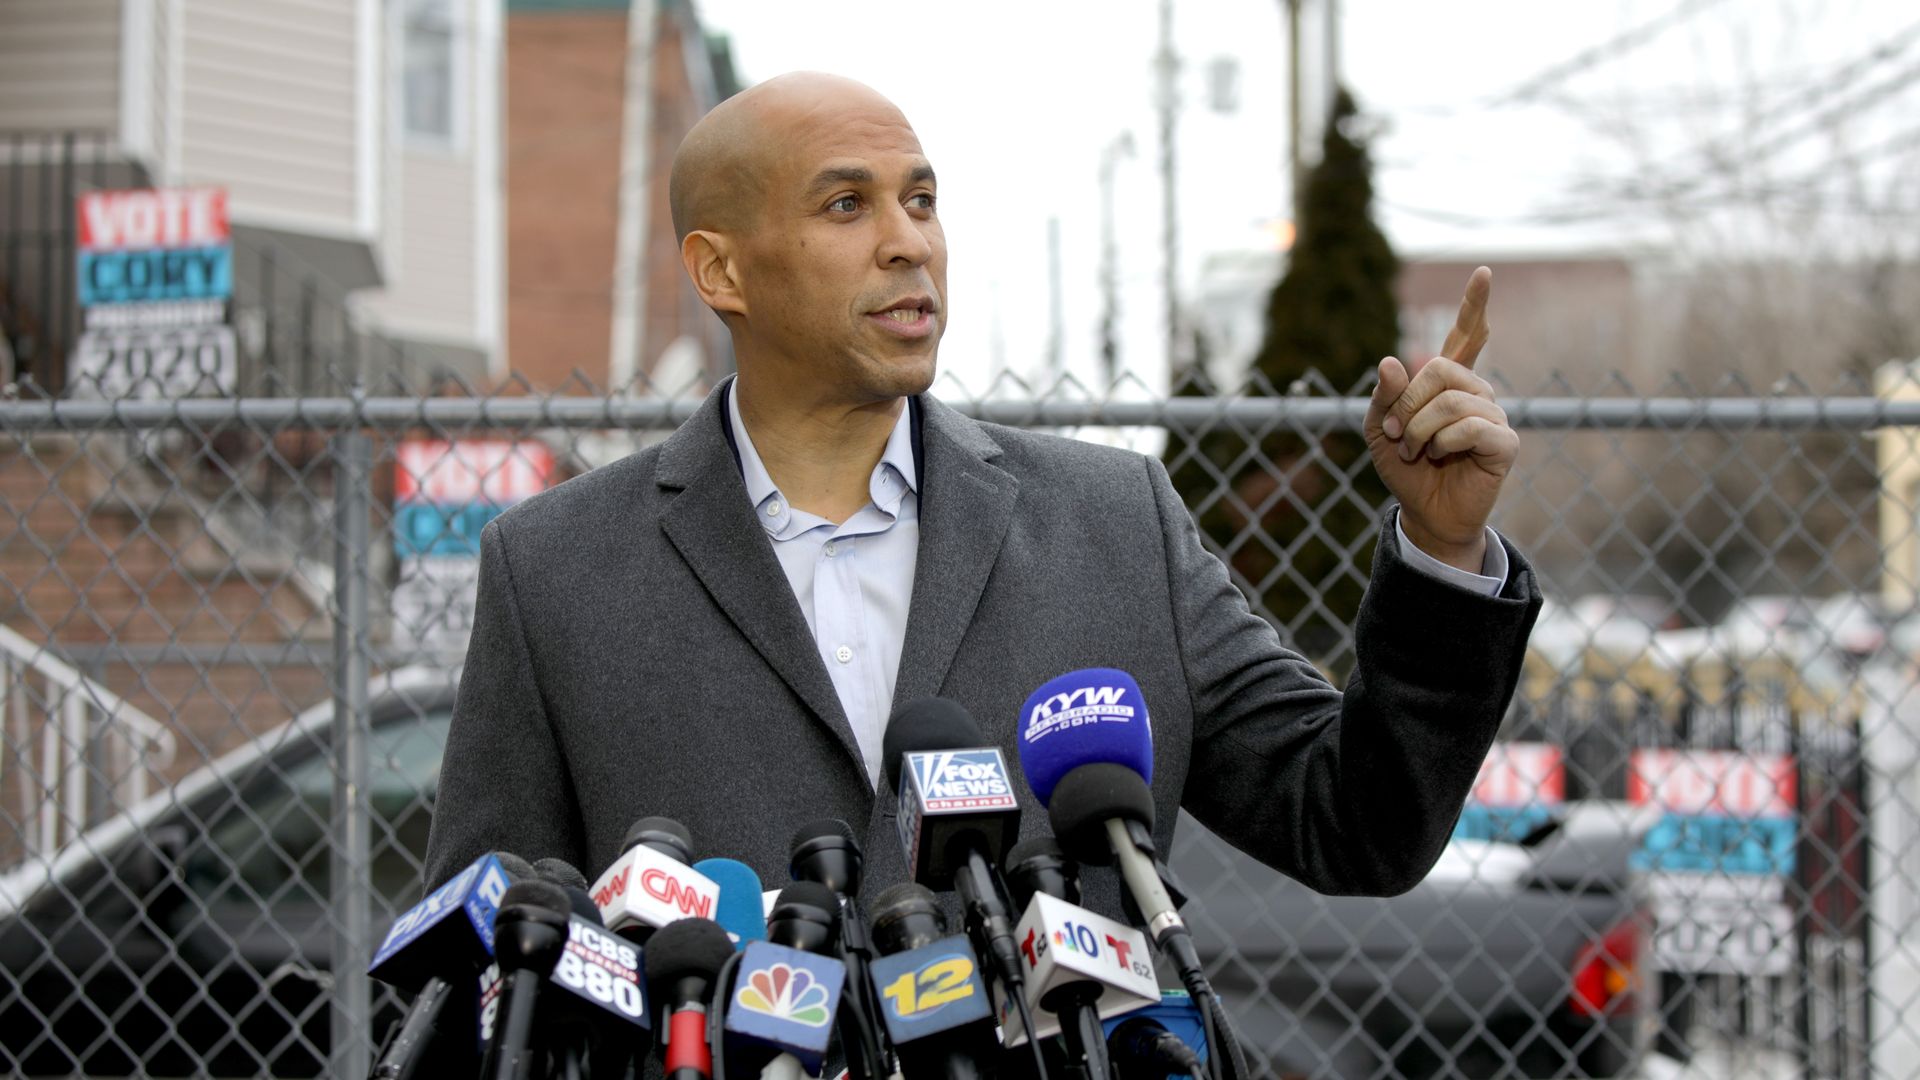 Cory Booker at his 2020 campaign announcement in Newark, N.J.